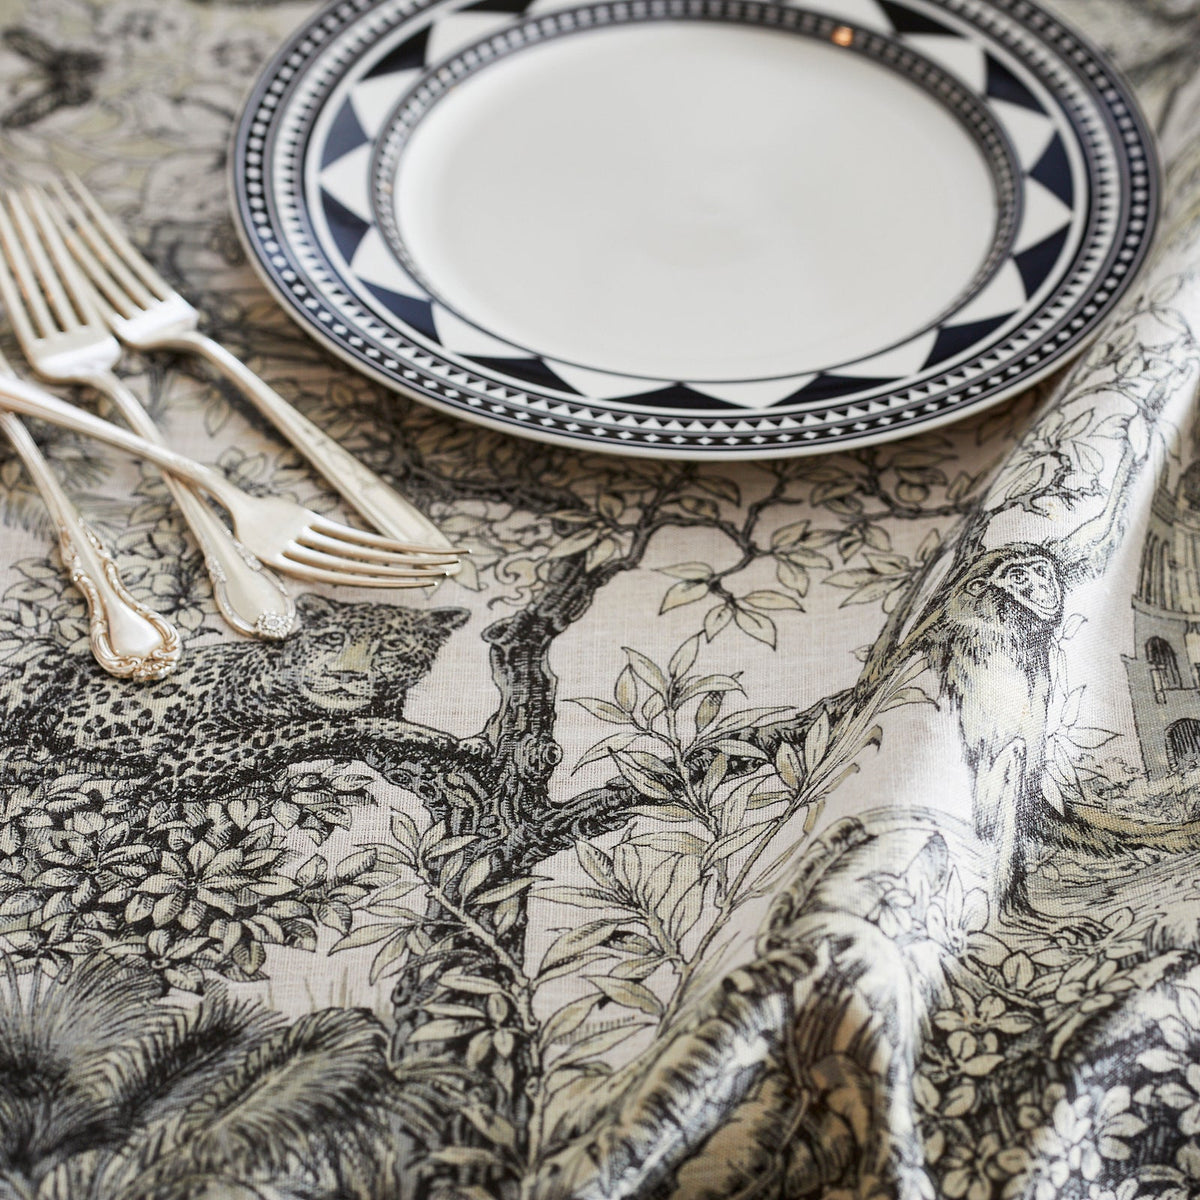 A Morocco Linen Tablecloth by TTT with a plate and fork on it.